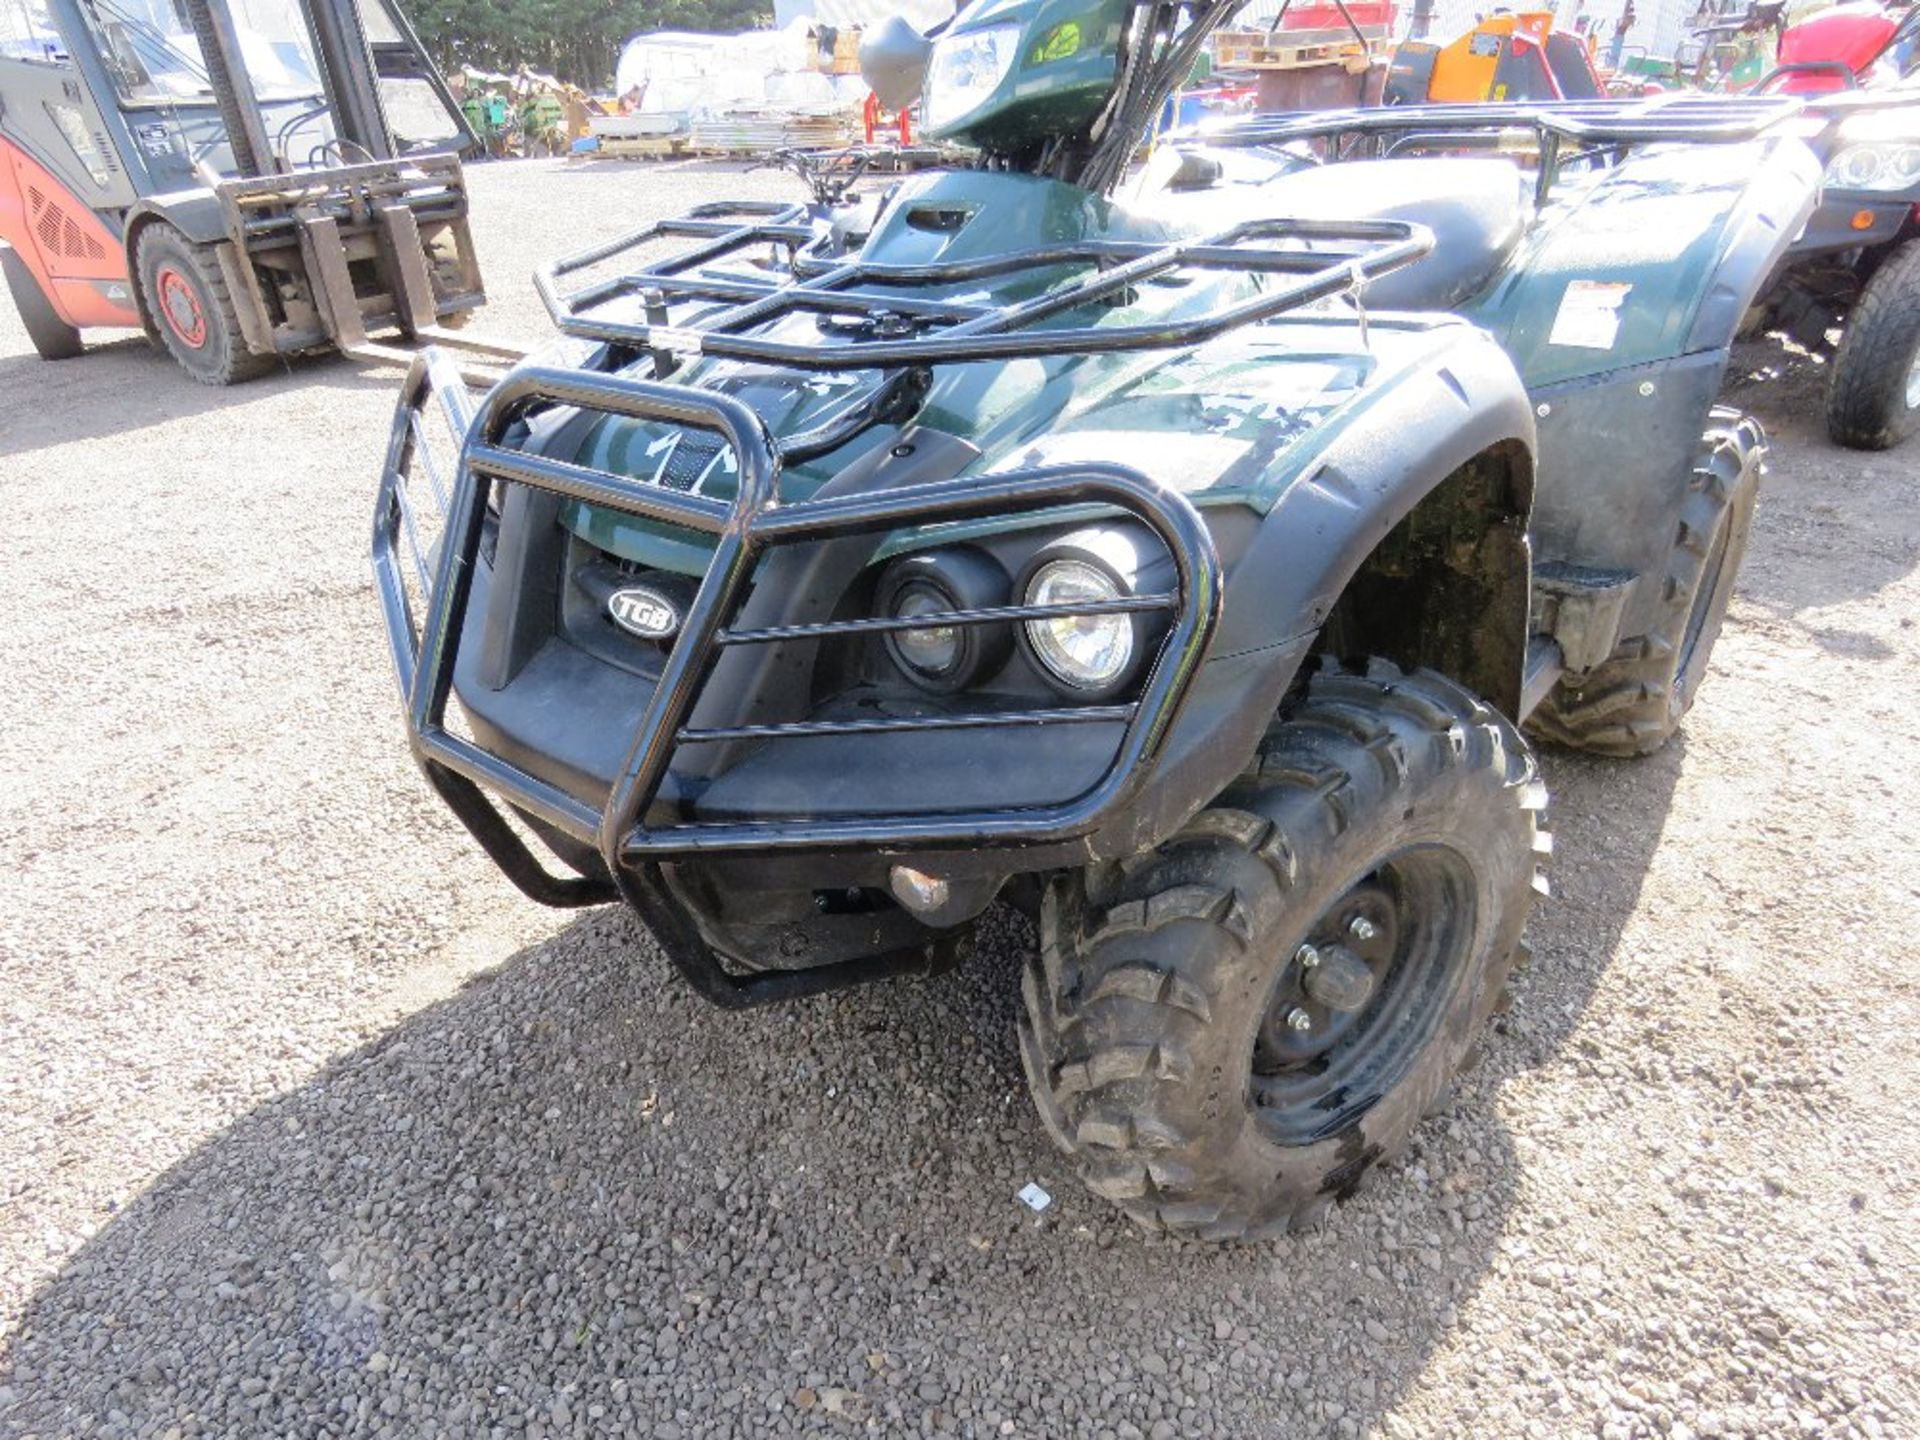 TGB BLADE 425 / QUADZILLA 4WD QUAD BIKE, YEAR 2017 DECLARED NEW. 664REC KMS APPROX. WHEN TESTED WAS - Image 8 of 8